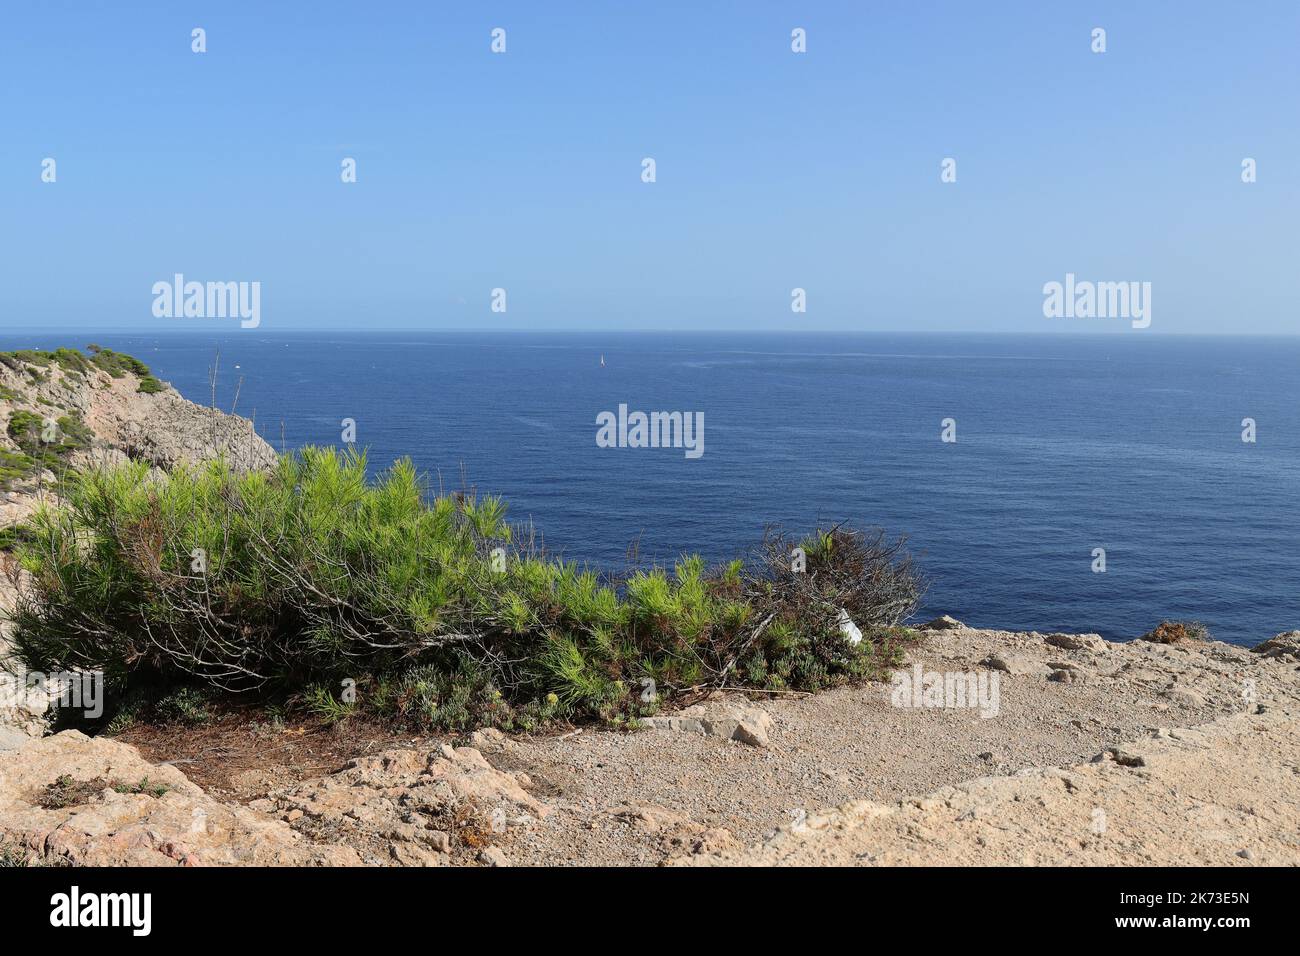 idyllic view of sunlit rocks above the sea with green vegetation in the foreground, Cala Ratjada, Mallorca, copy space Stock Photo